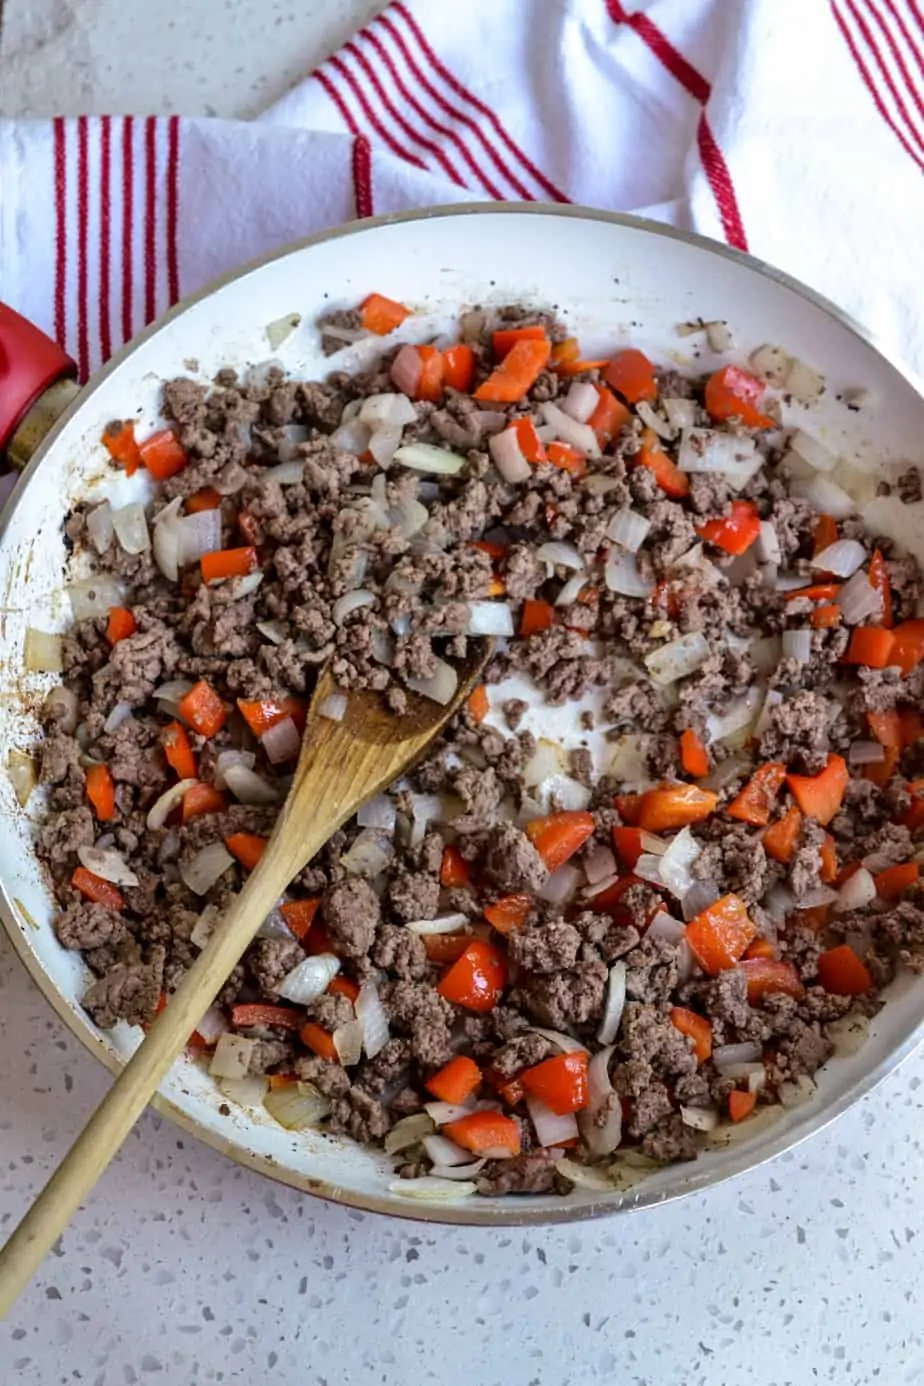 To start Cuban Picadillo brown the ground beef. Then add the onion and red bell pepper.